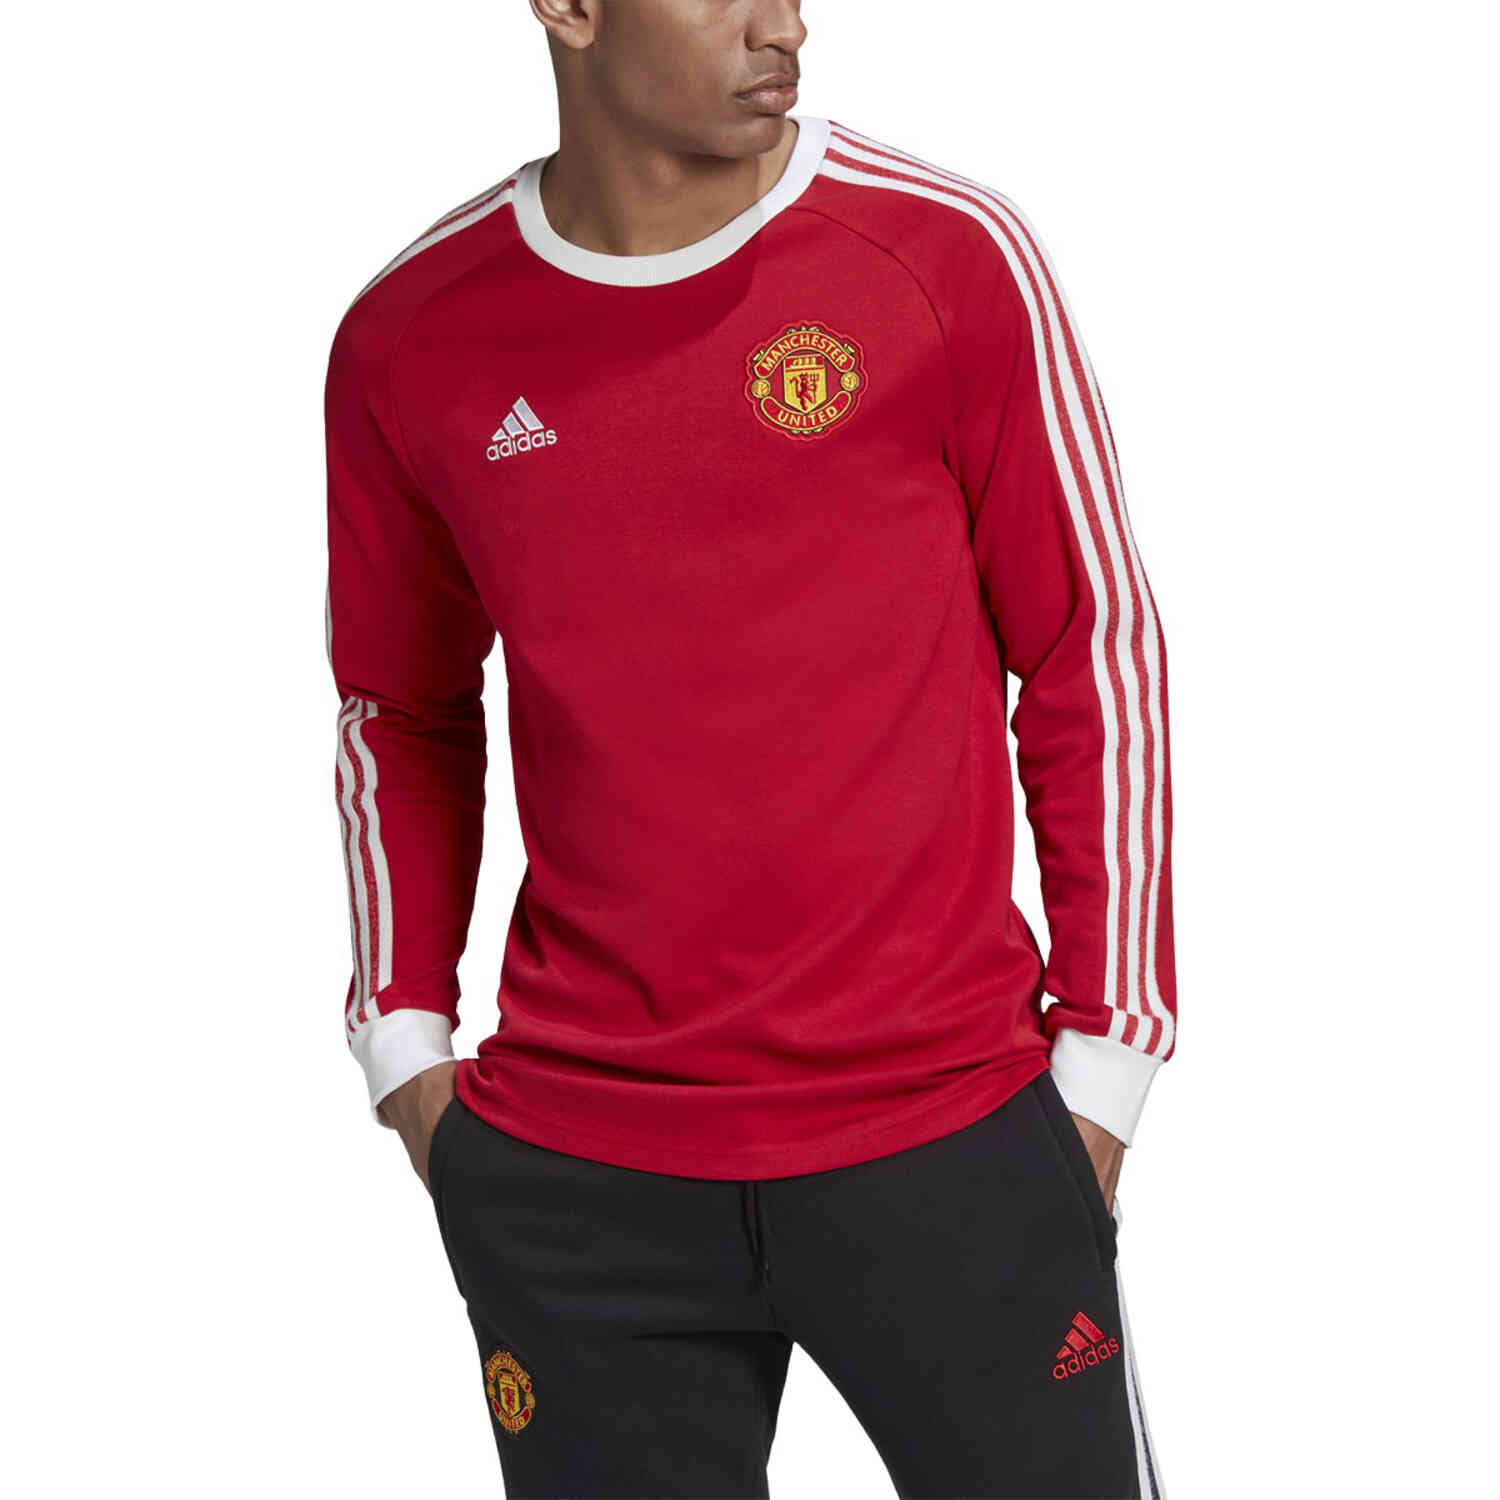 Bloesem krom Gezondheid adidas Manchester United Icons Tee - Real Red - SoccerPro